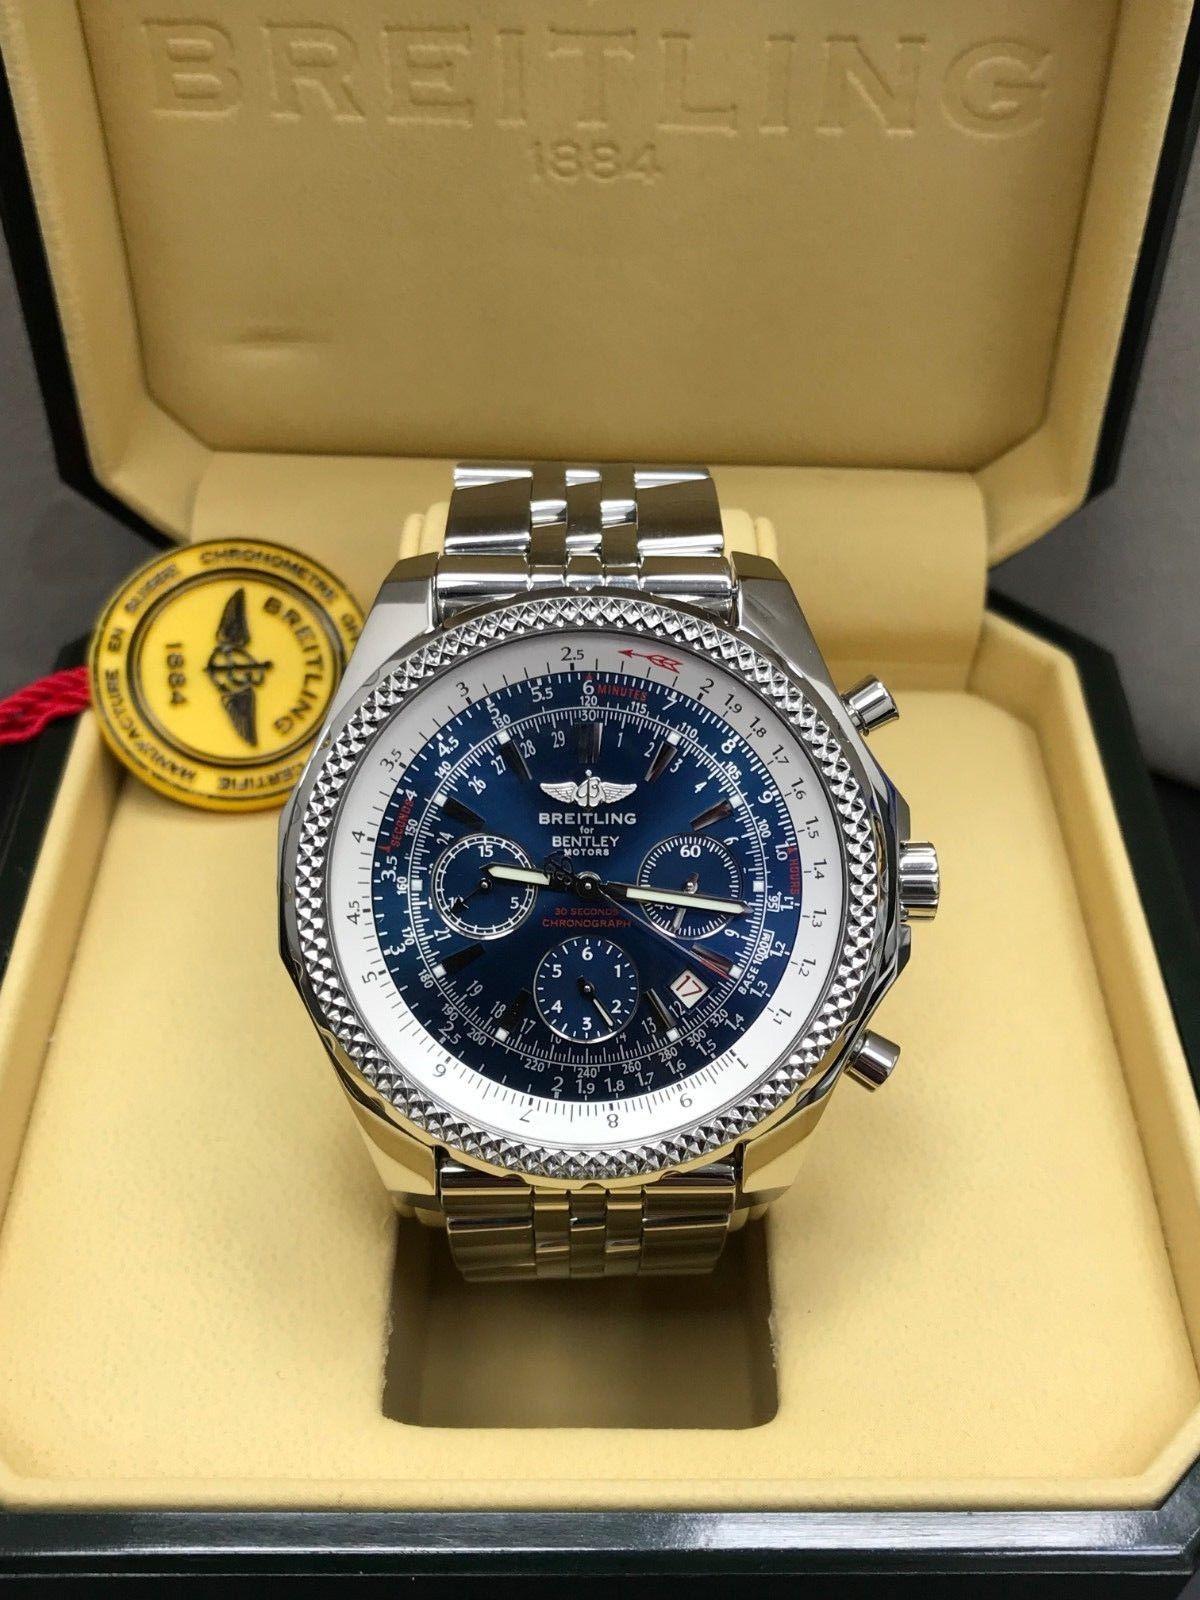 breitling a25362 special edition certified chronometer 100m/330ft